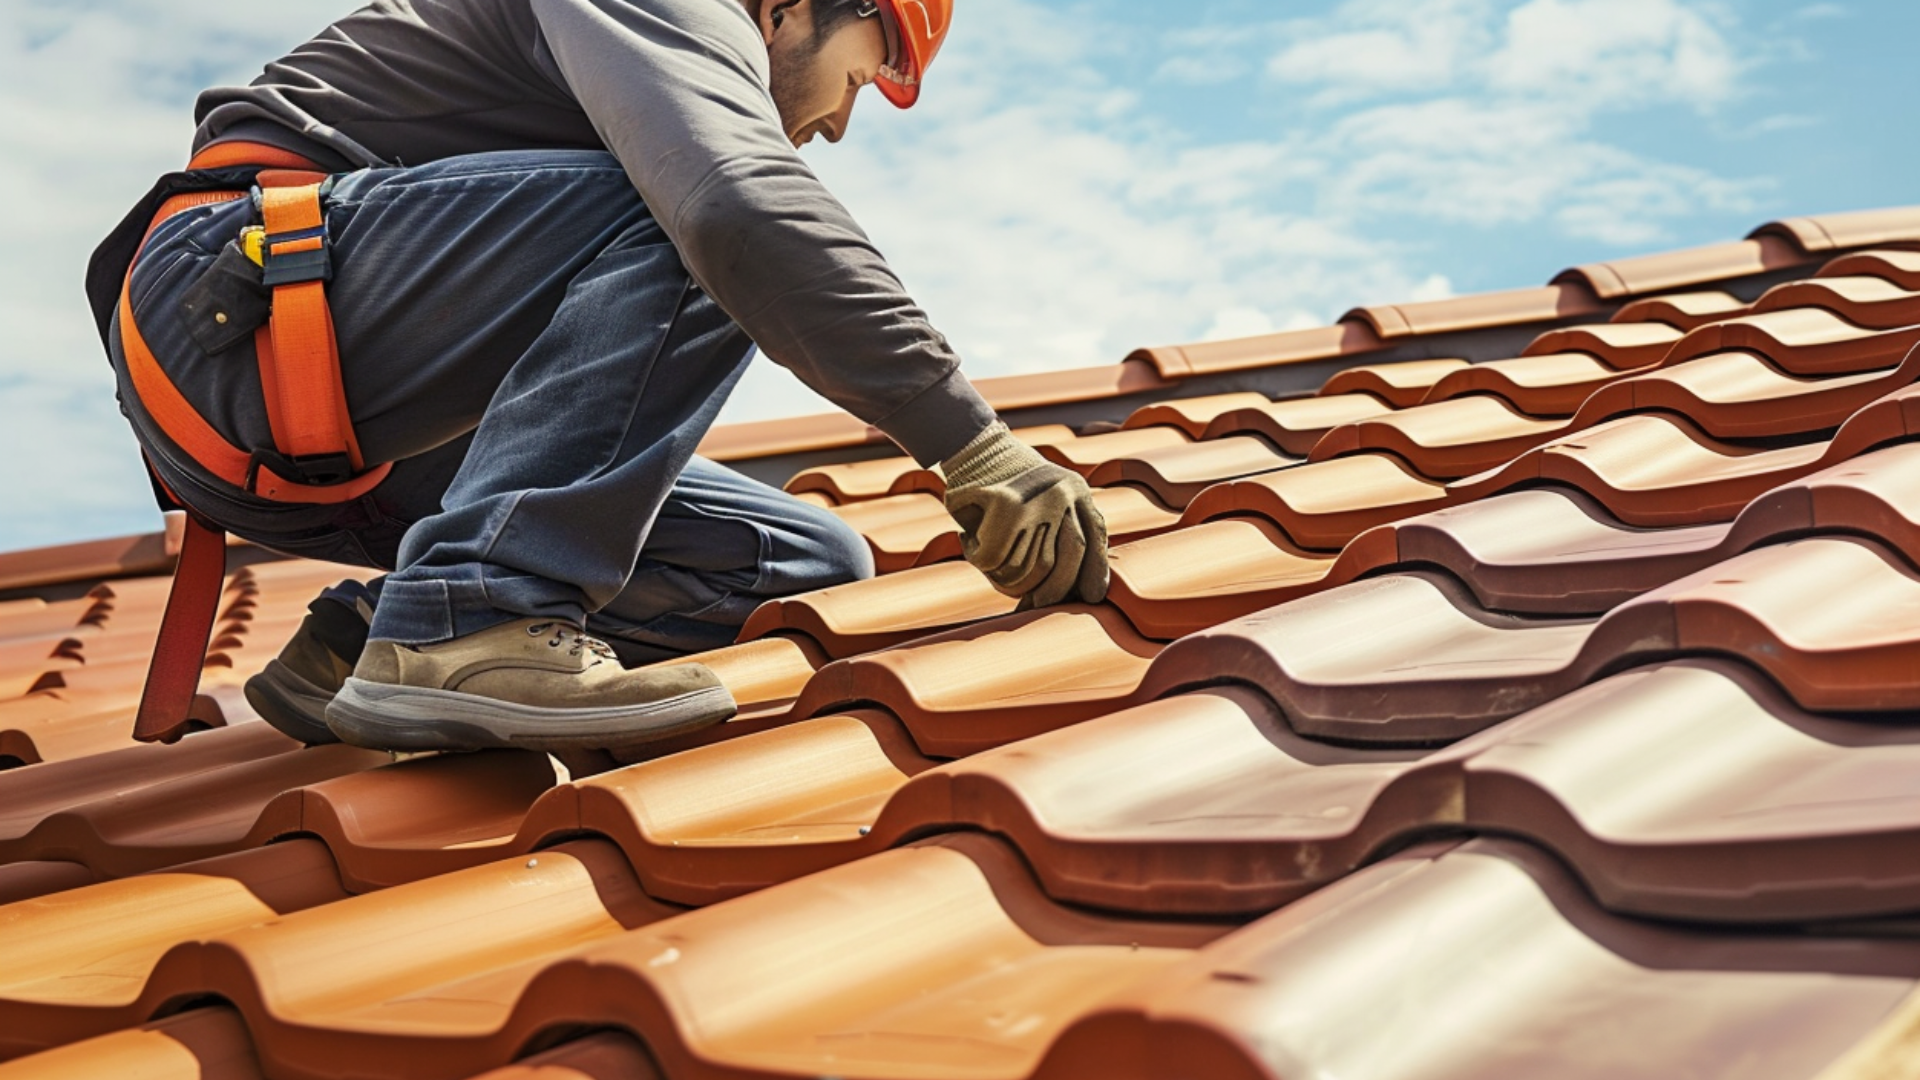 A roofing contractor installing clay tiles on a roof.